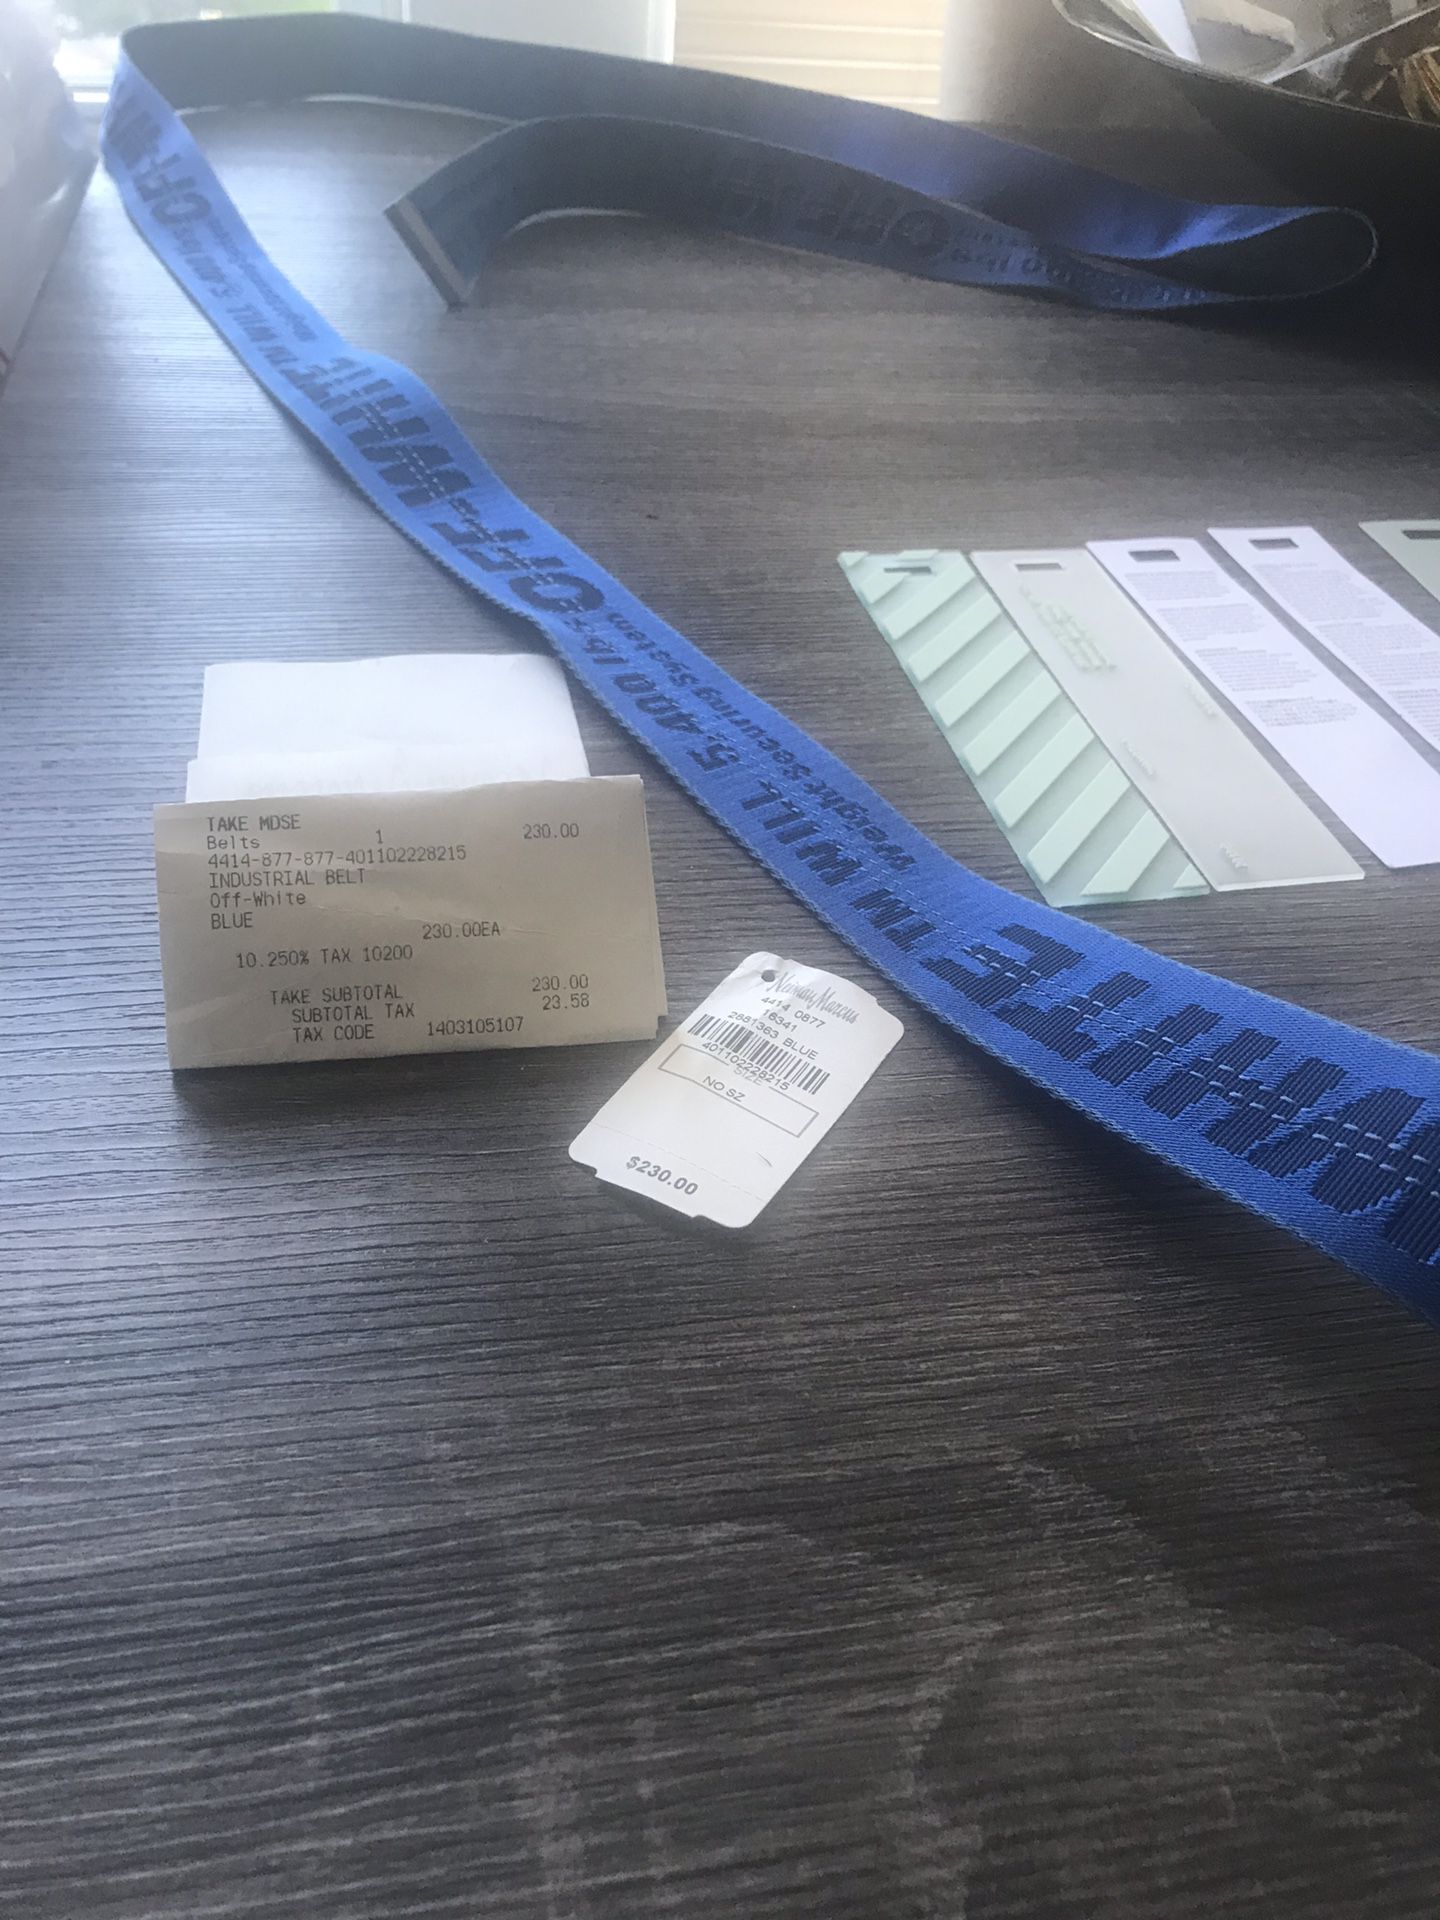 Off-White Belt (Blue) original receipt and tags shown